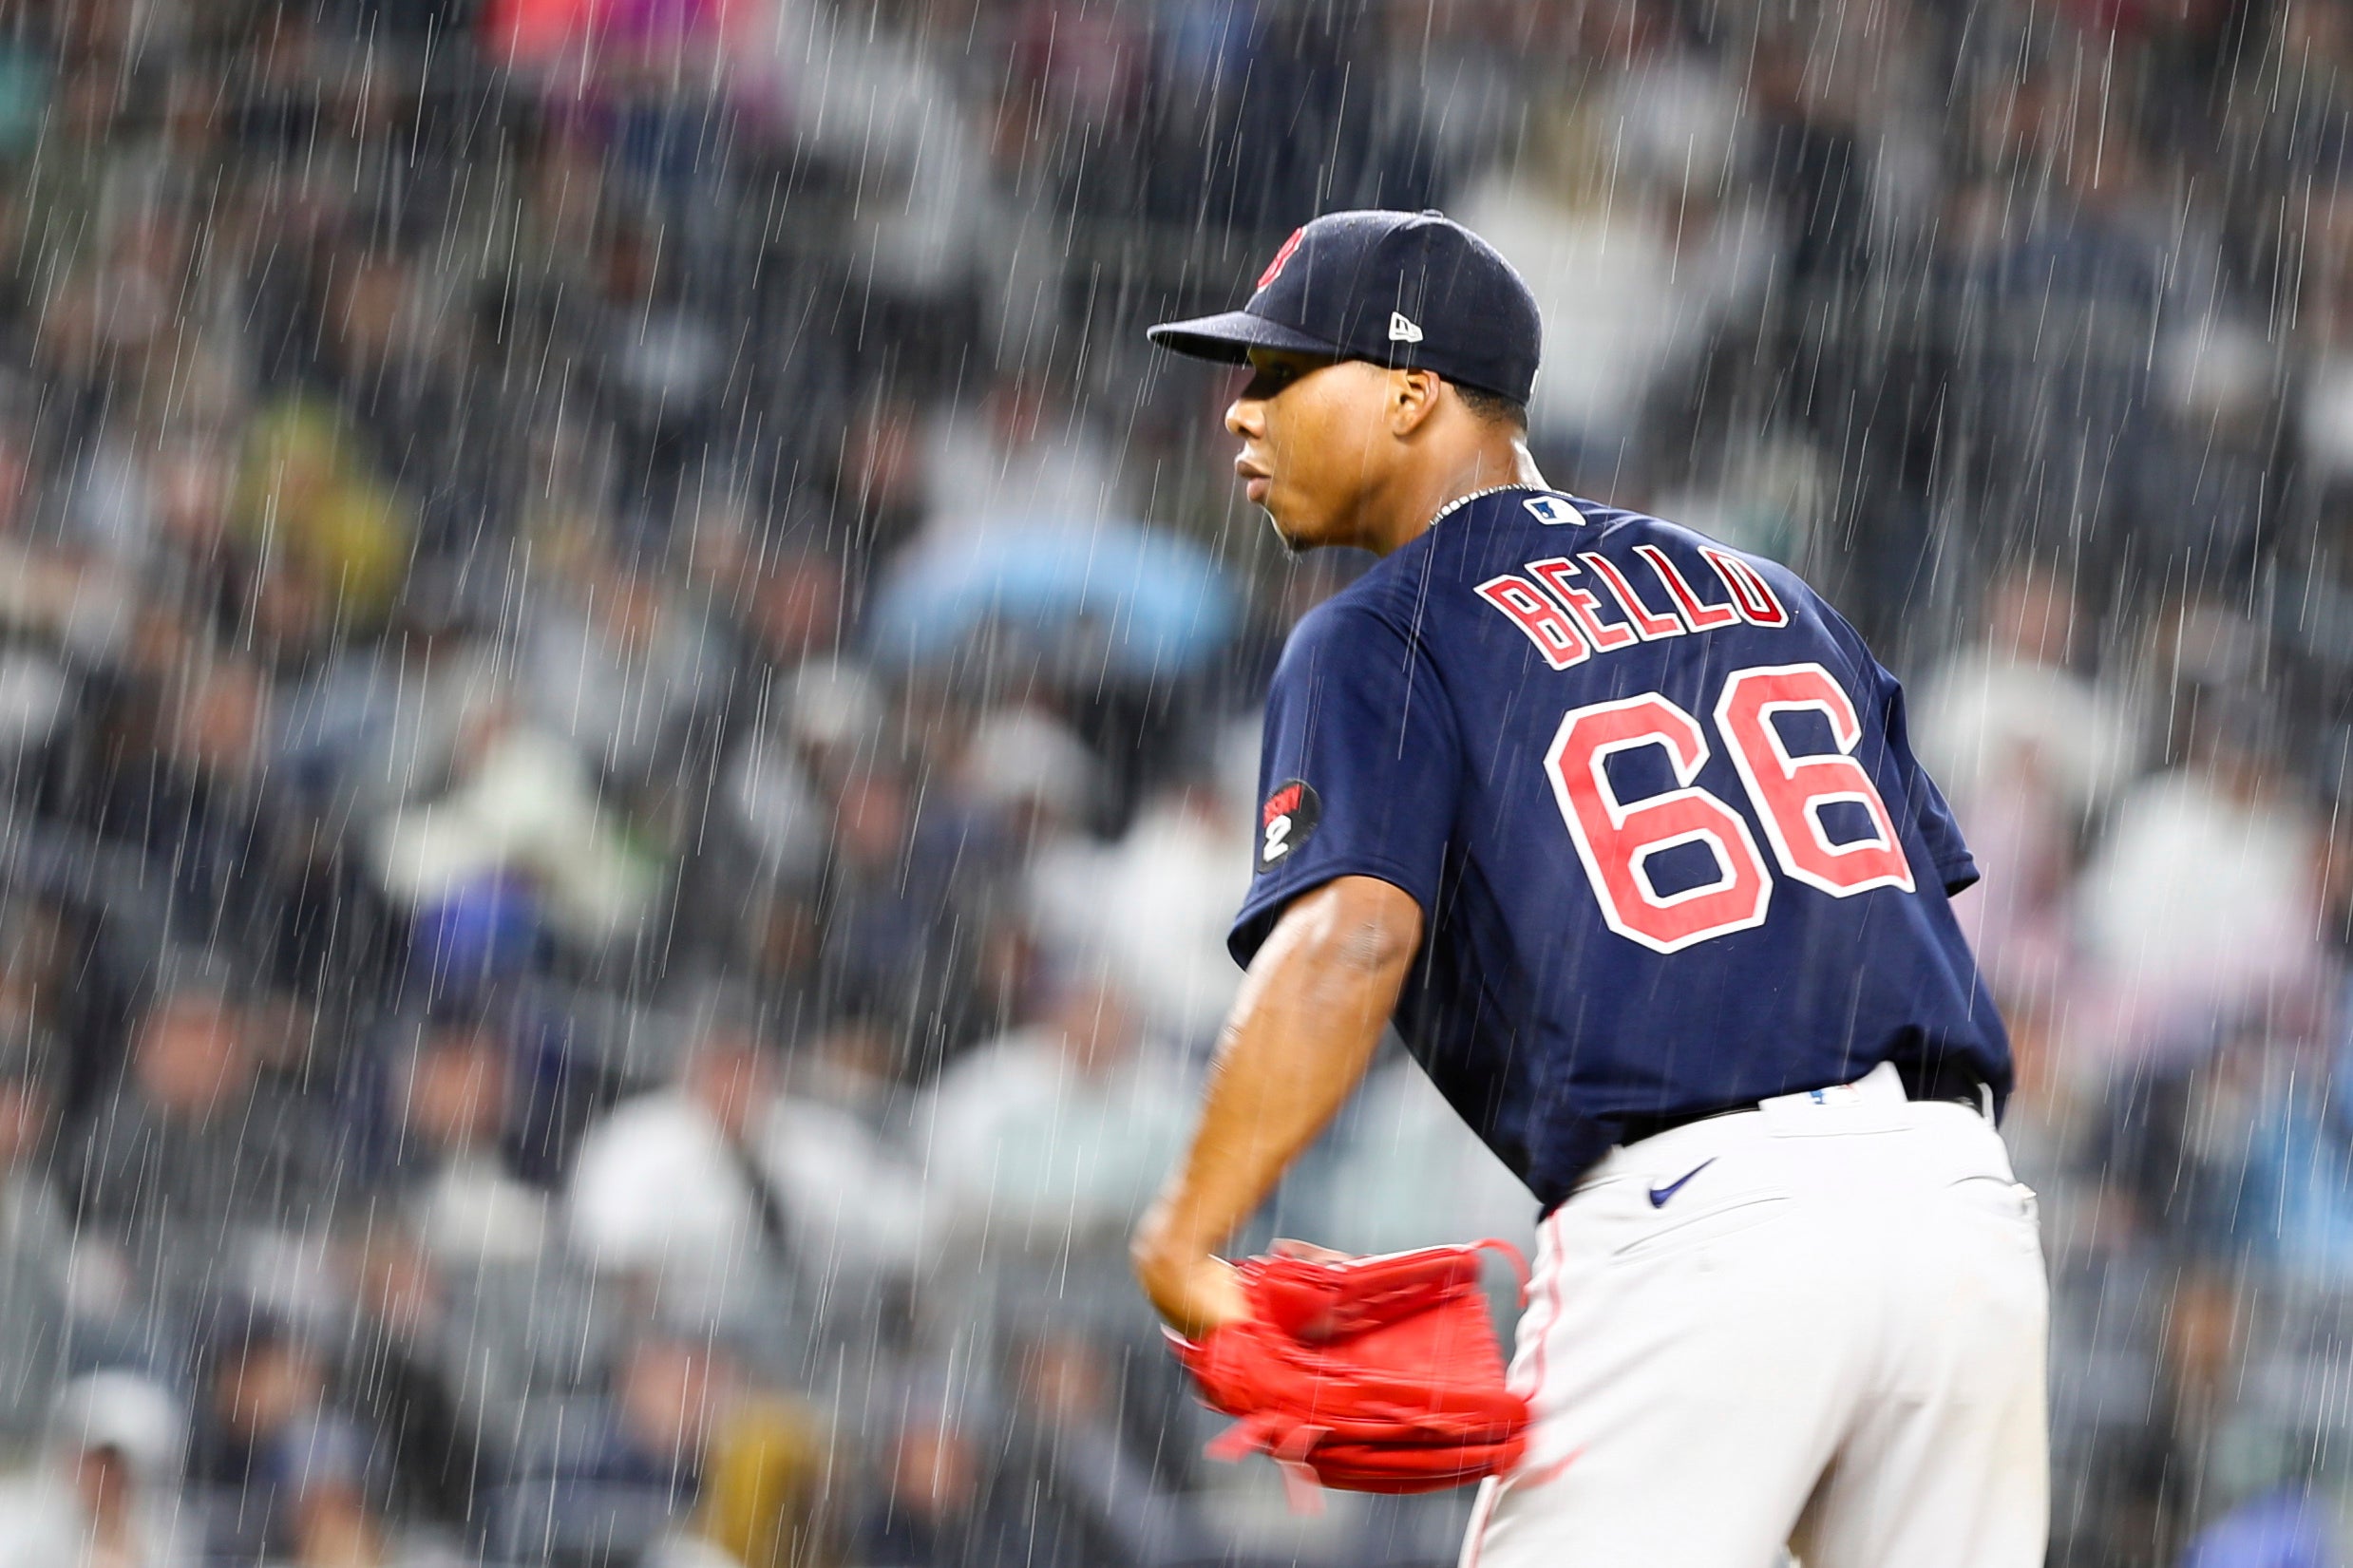 Red Sox pitcher Brayan Bello looks in toward home plate as a heavy rain falls at Yankee Stadium.